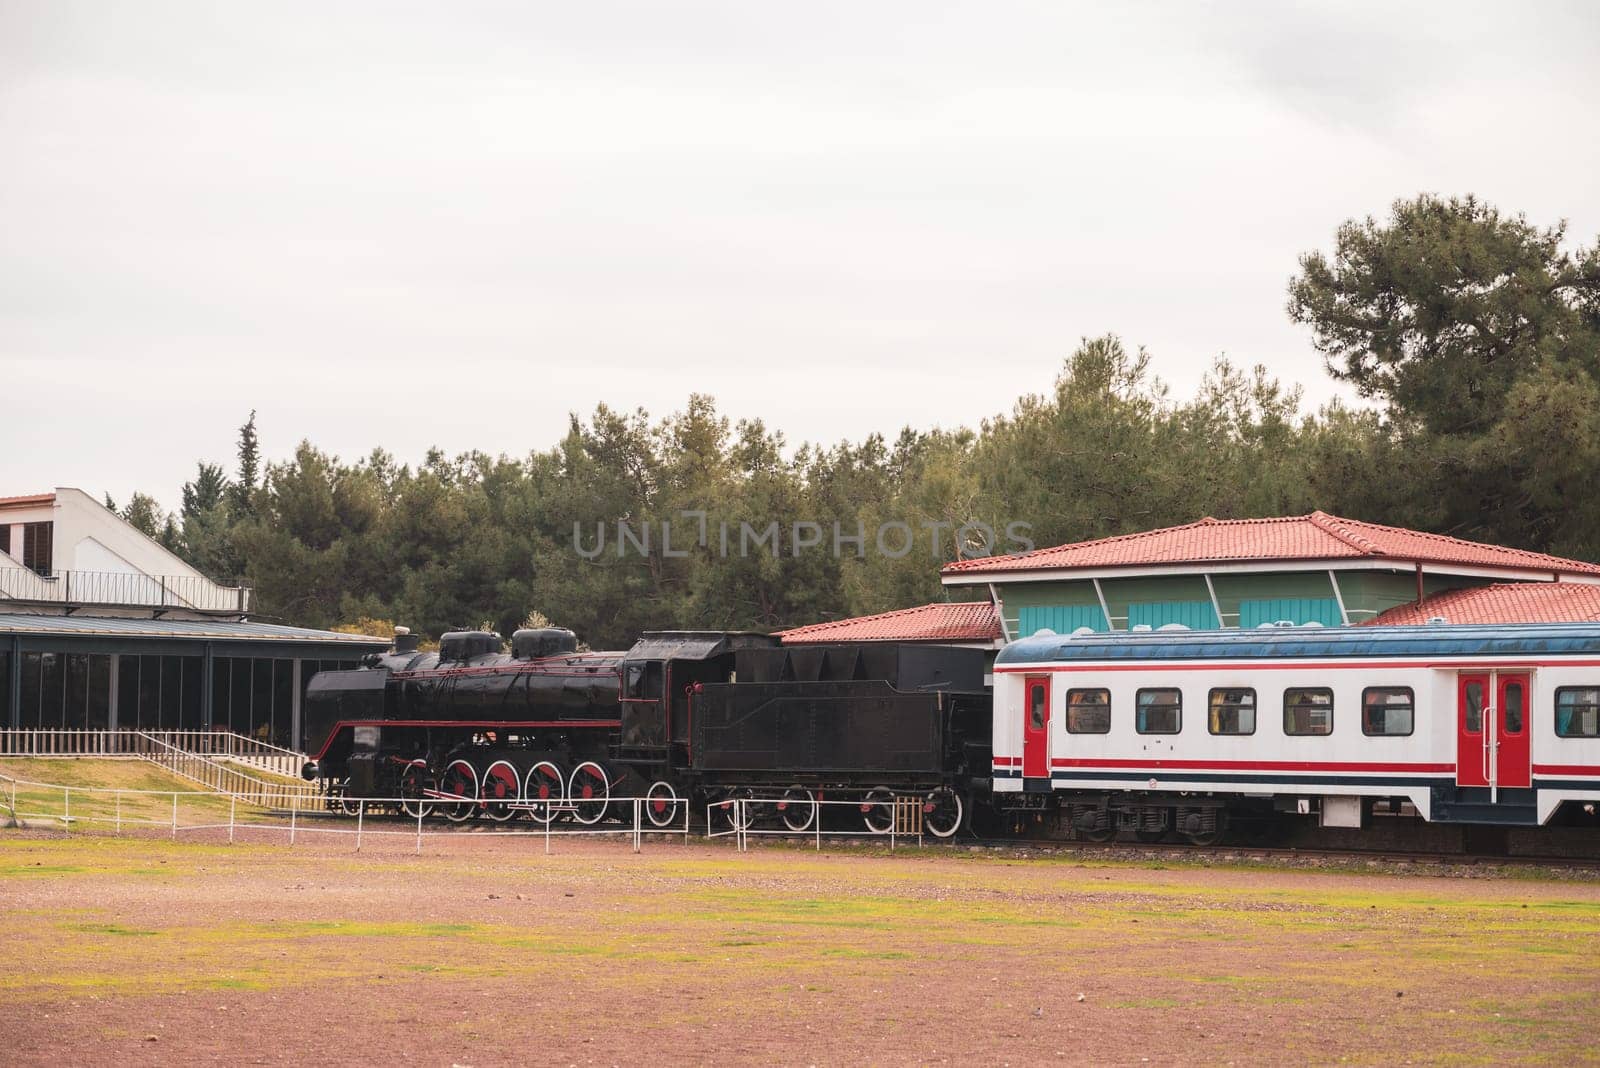 Vintage passenger train waiting for passengers at the train station by Sonat